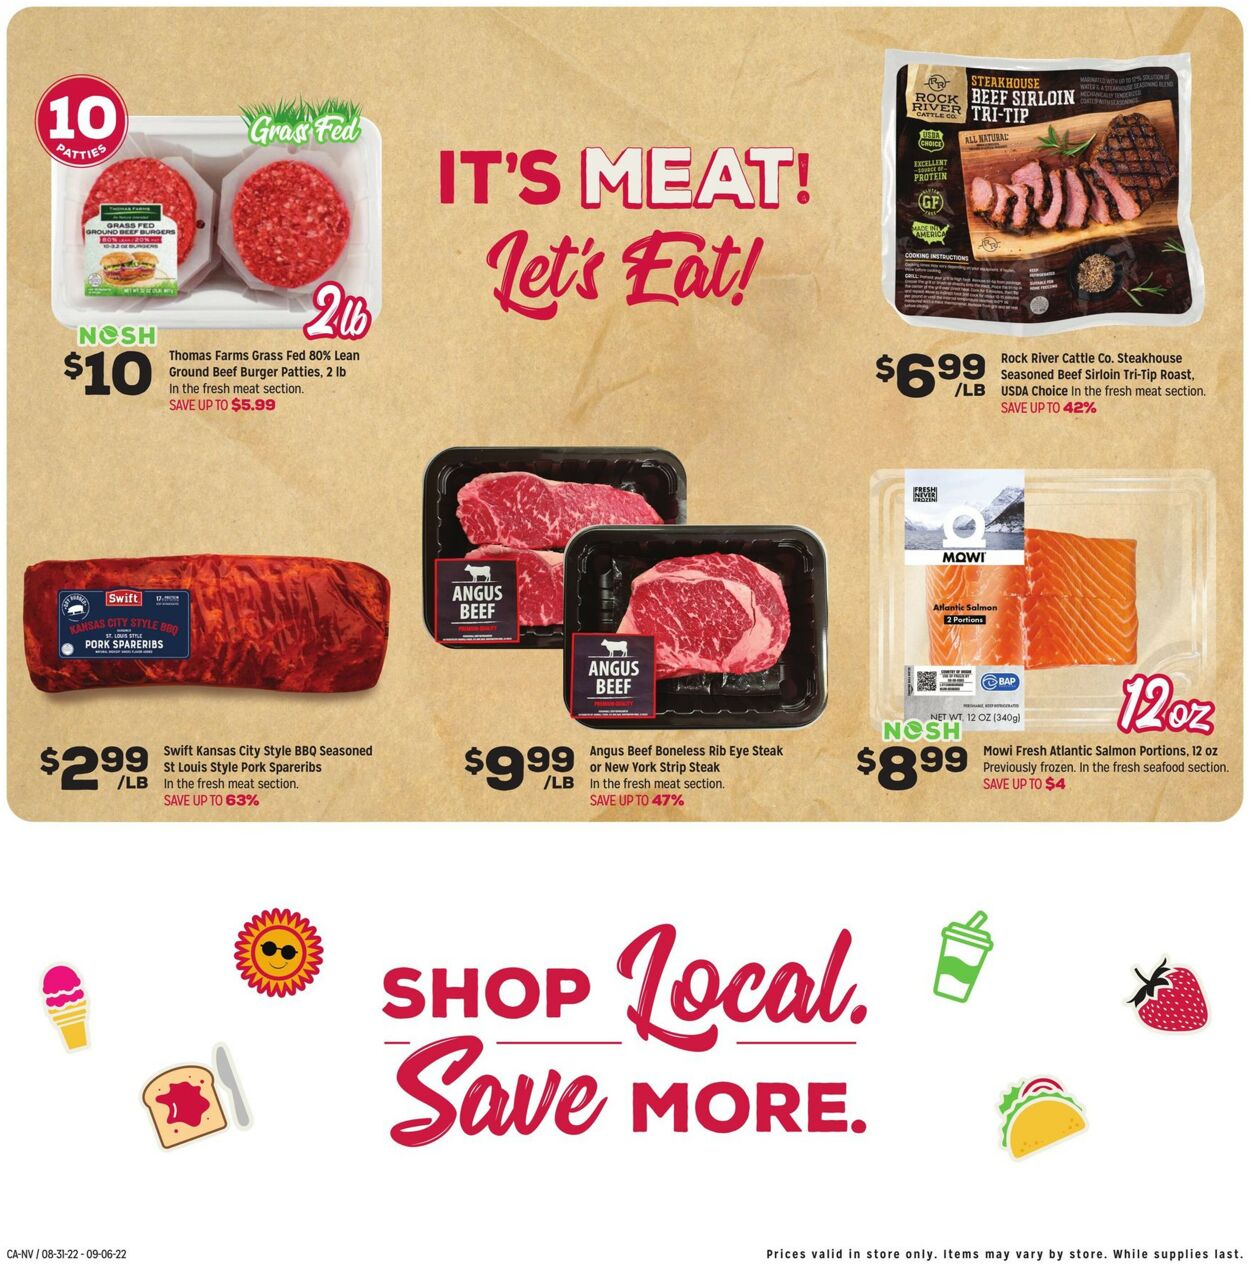 Grocery Outlet Weekly Ad Circular - valid 08/31-09/06/2022 (Page 2)